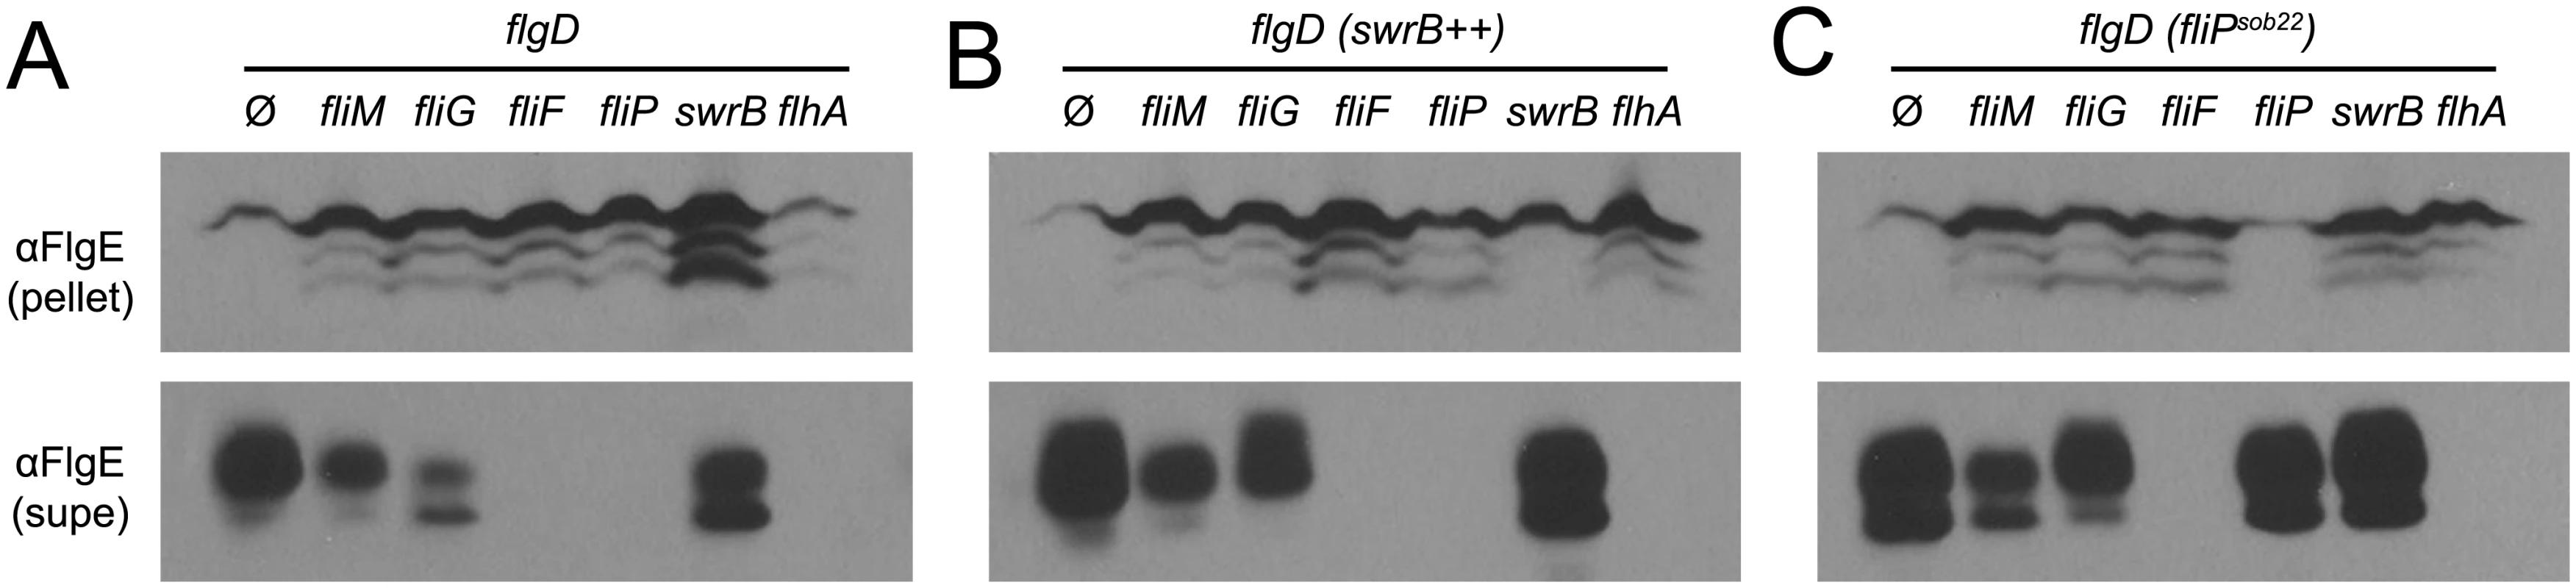 SwrB overexpression bypasses the hook protein secretion hook in cells mutated for FliM and FliG but not cells mutated for FliF.